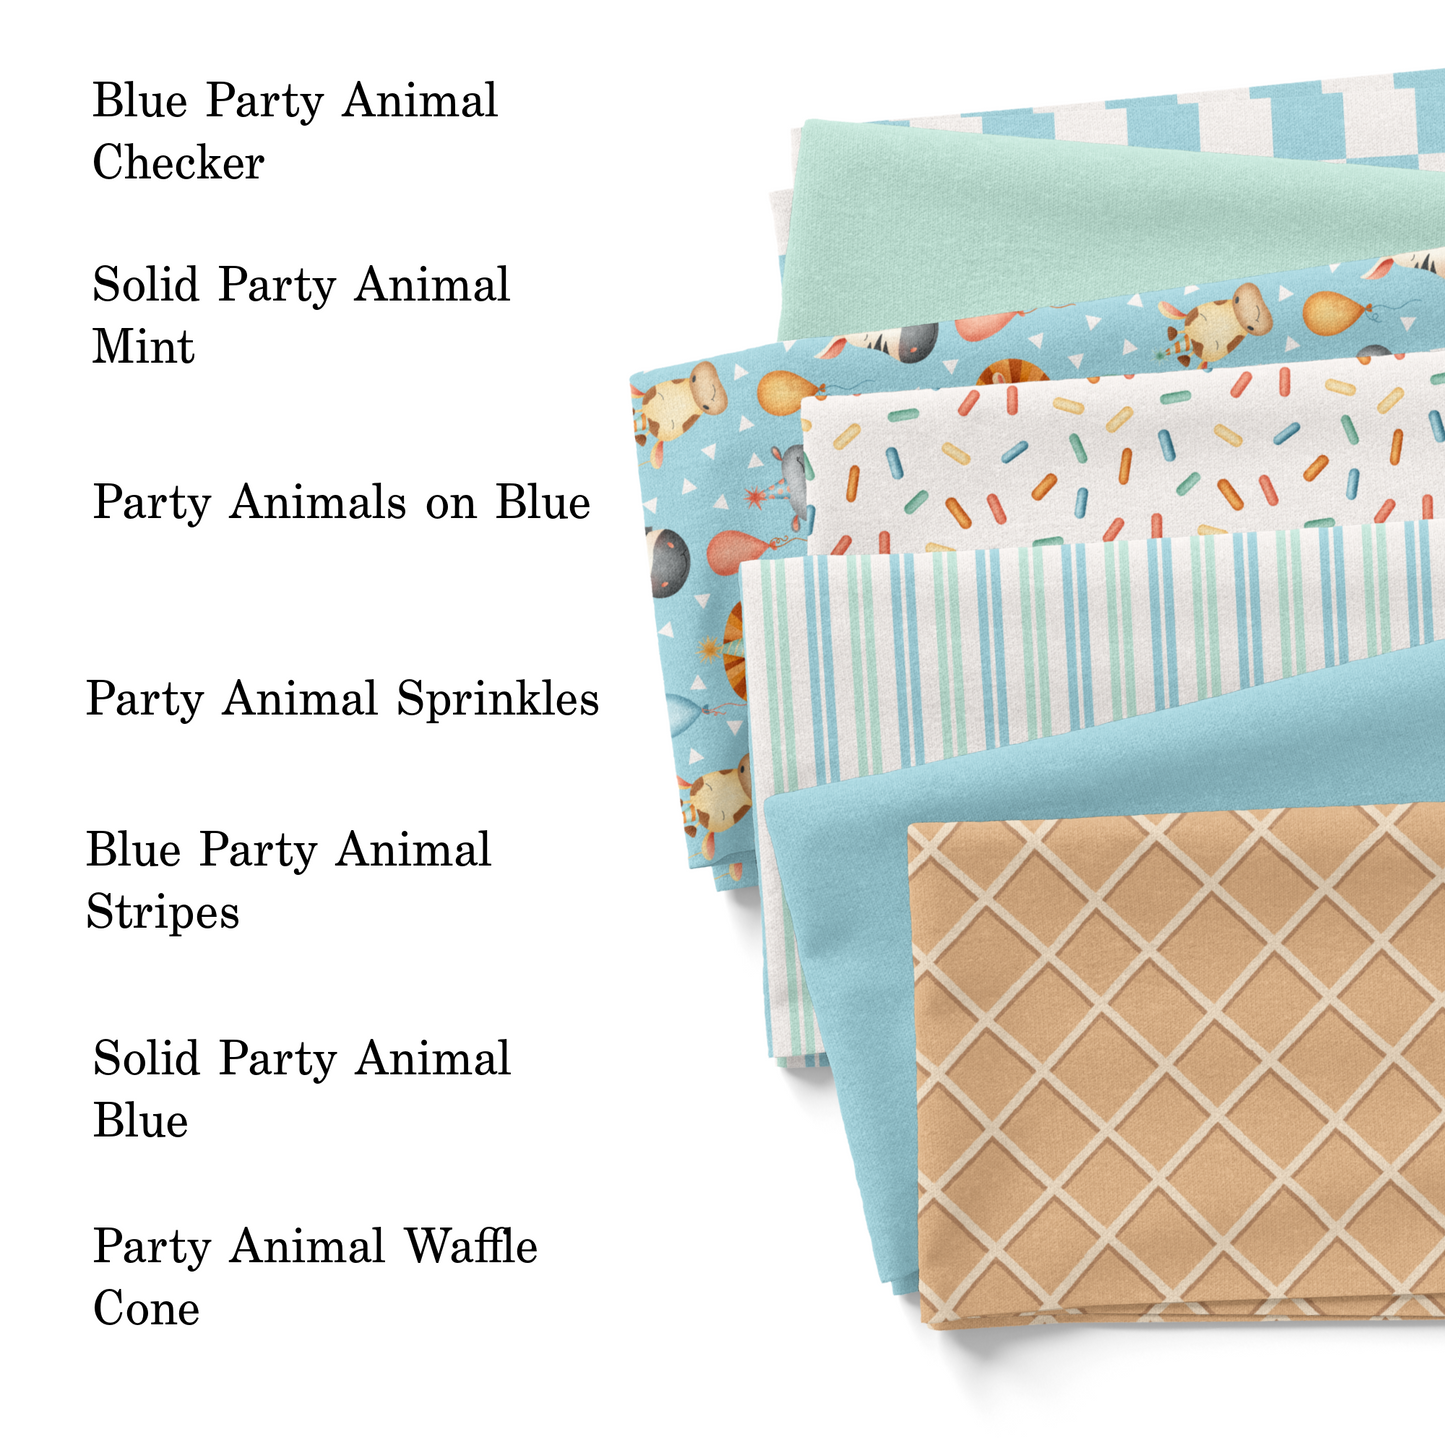 Blue Party Animal Checker Fabric By The Yard